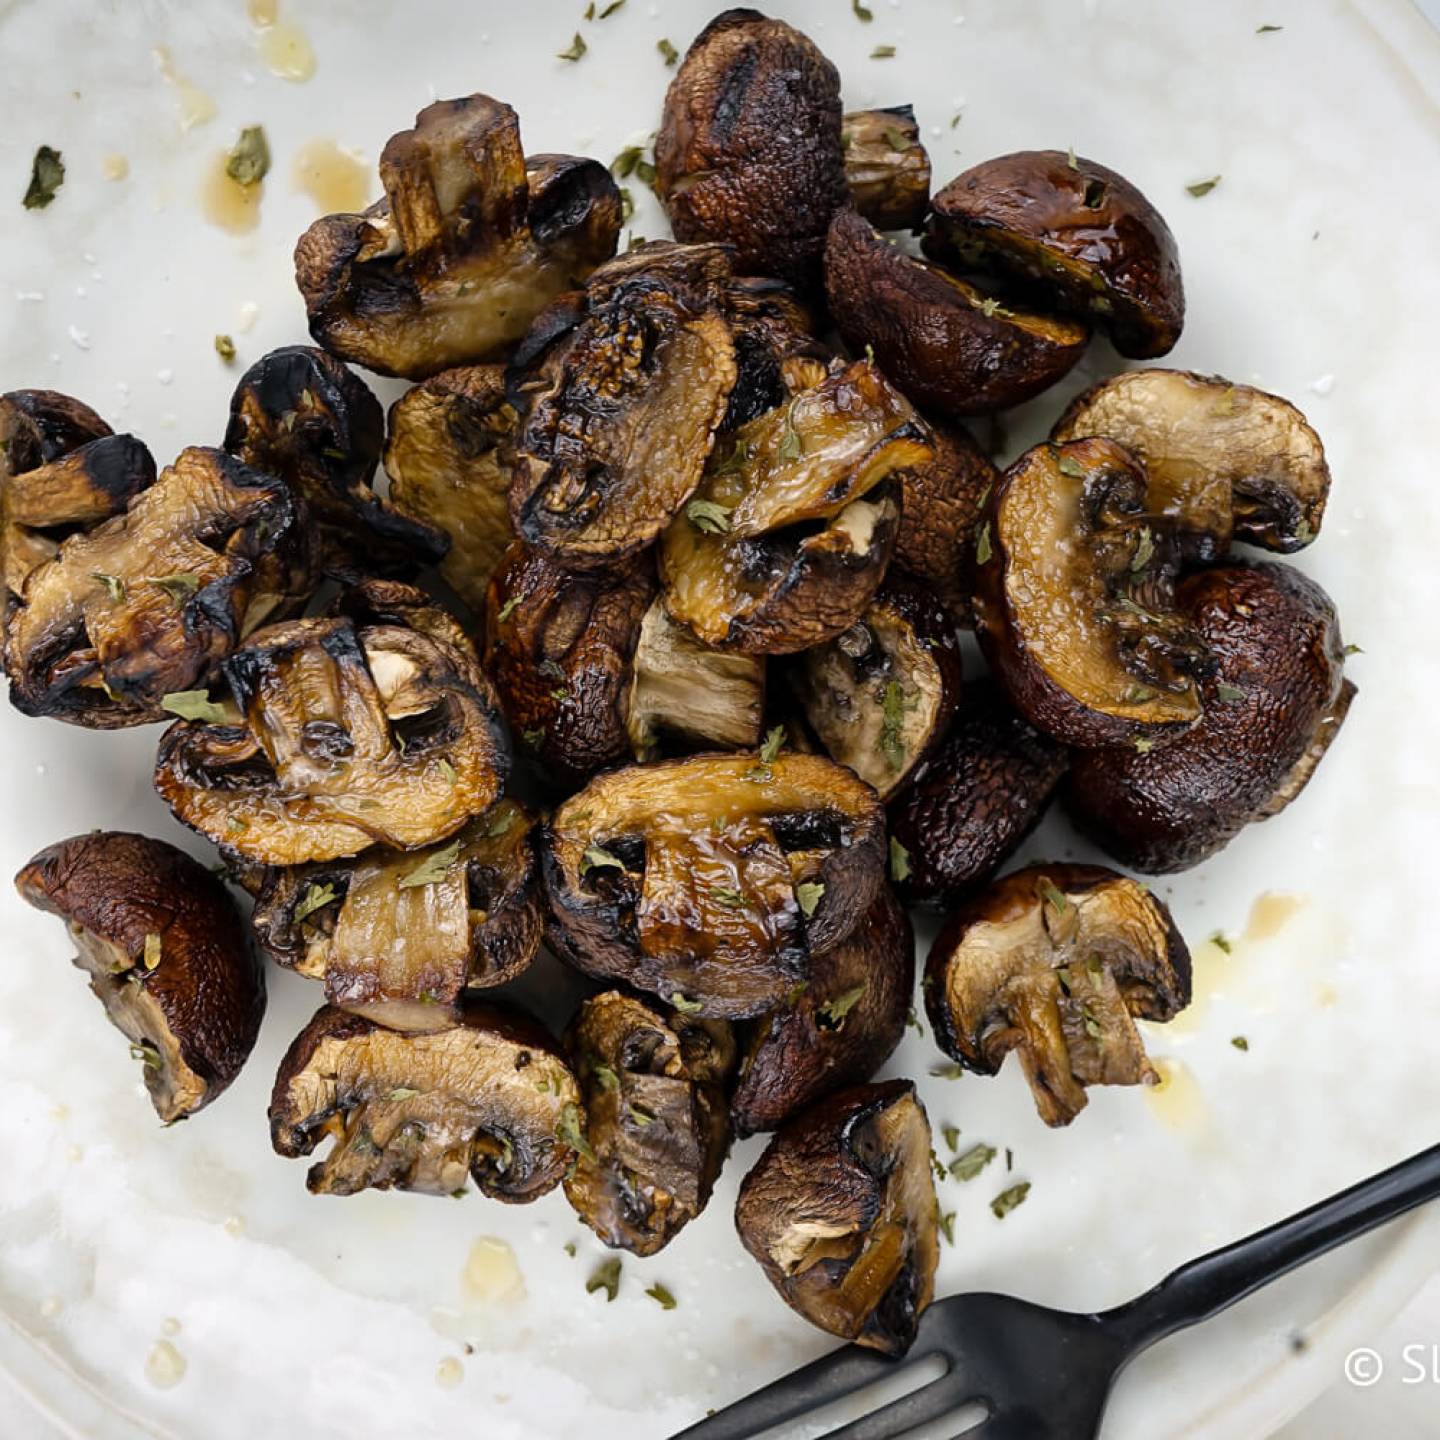 Grilled mushrooms with balsamic vinegar, olive oil, and garlic on a plate.